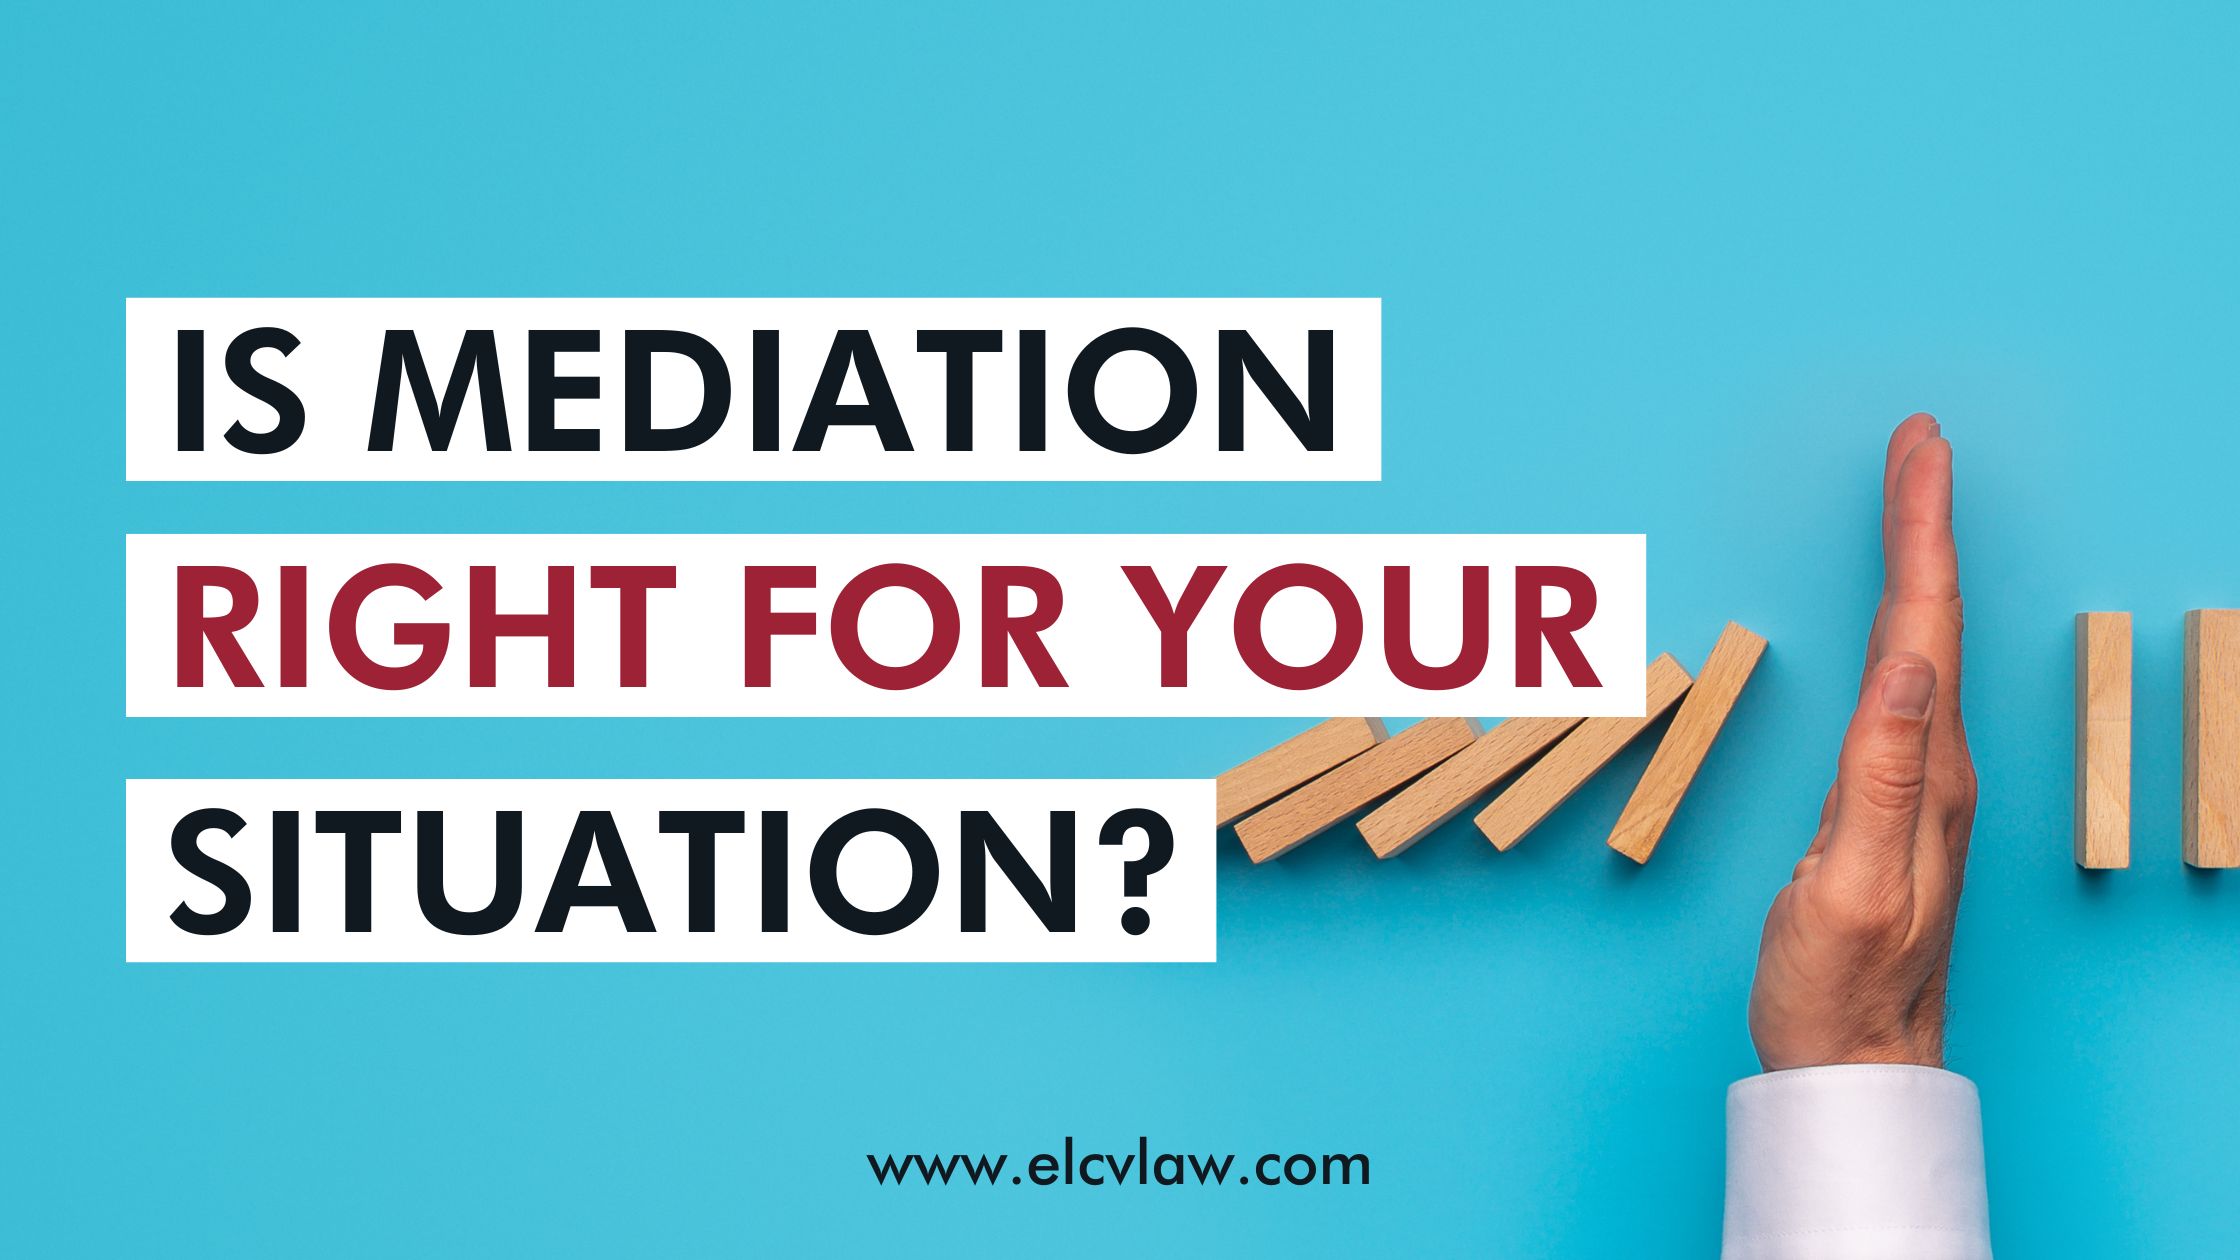 Is Mediation Right for Your Situation